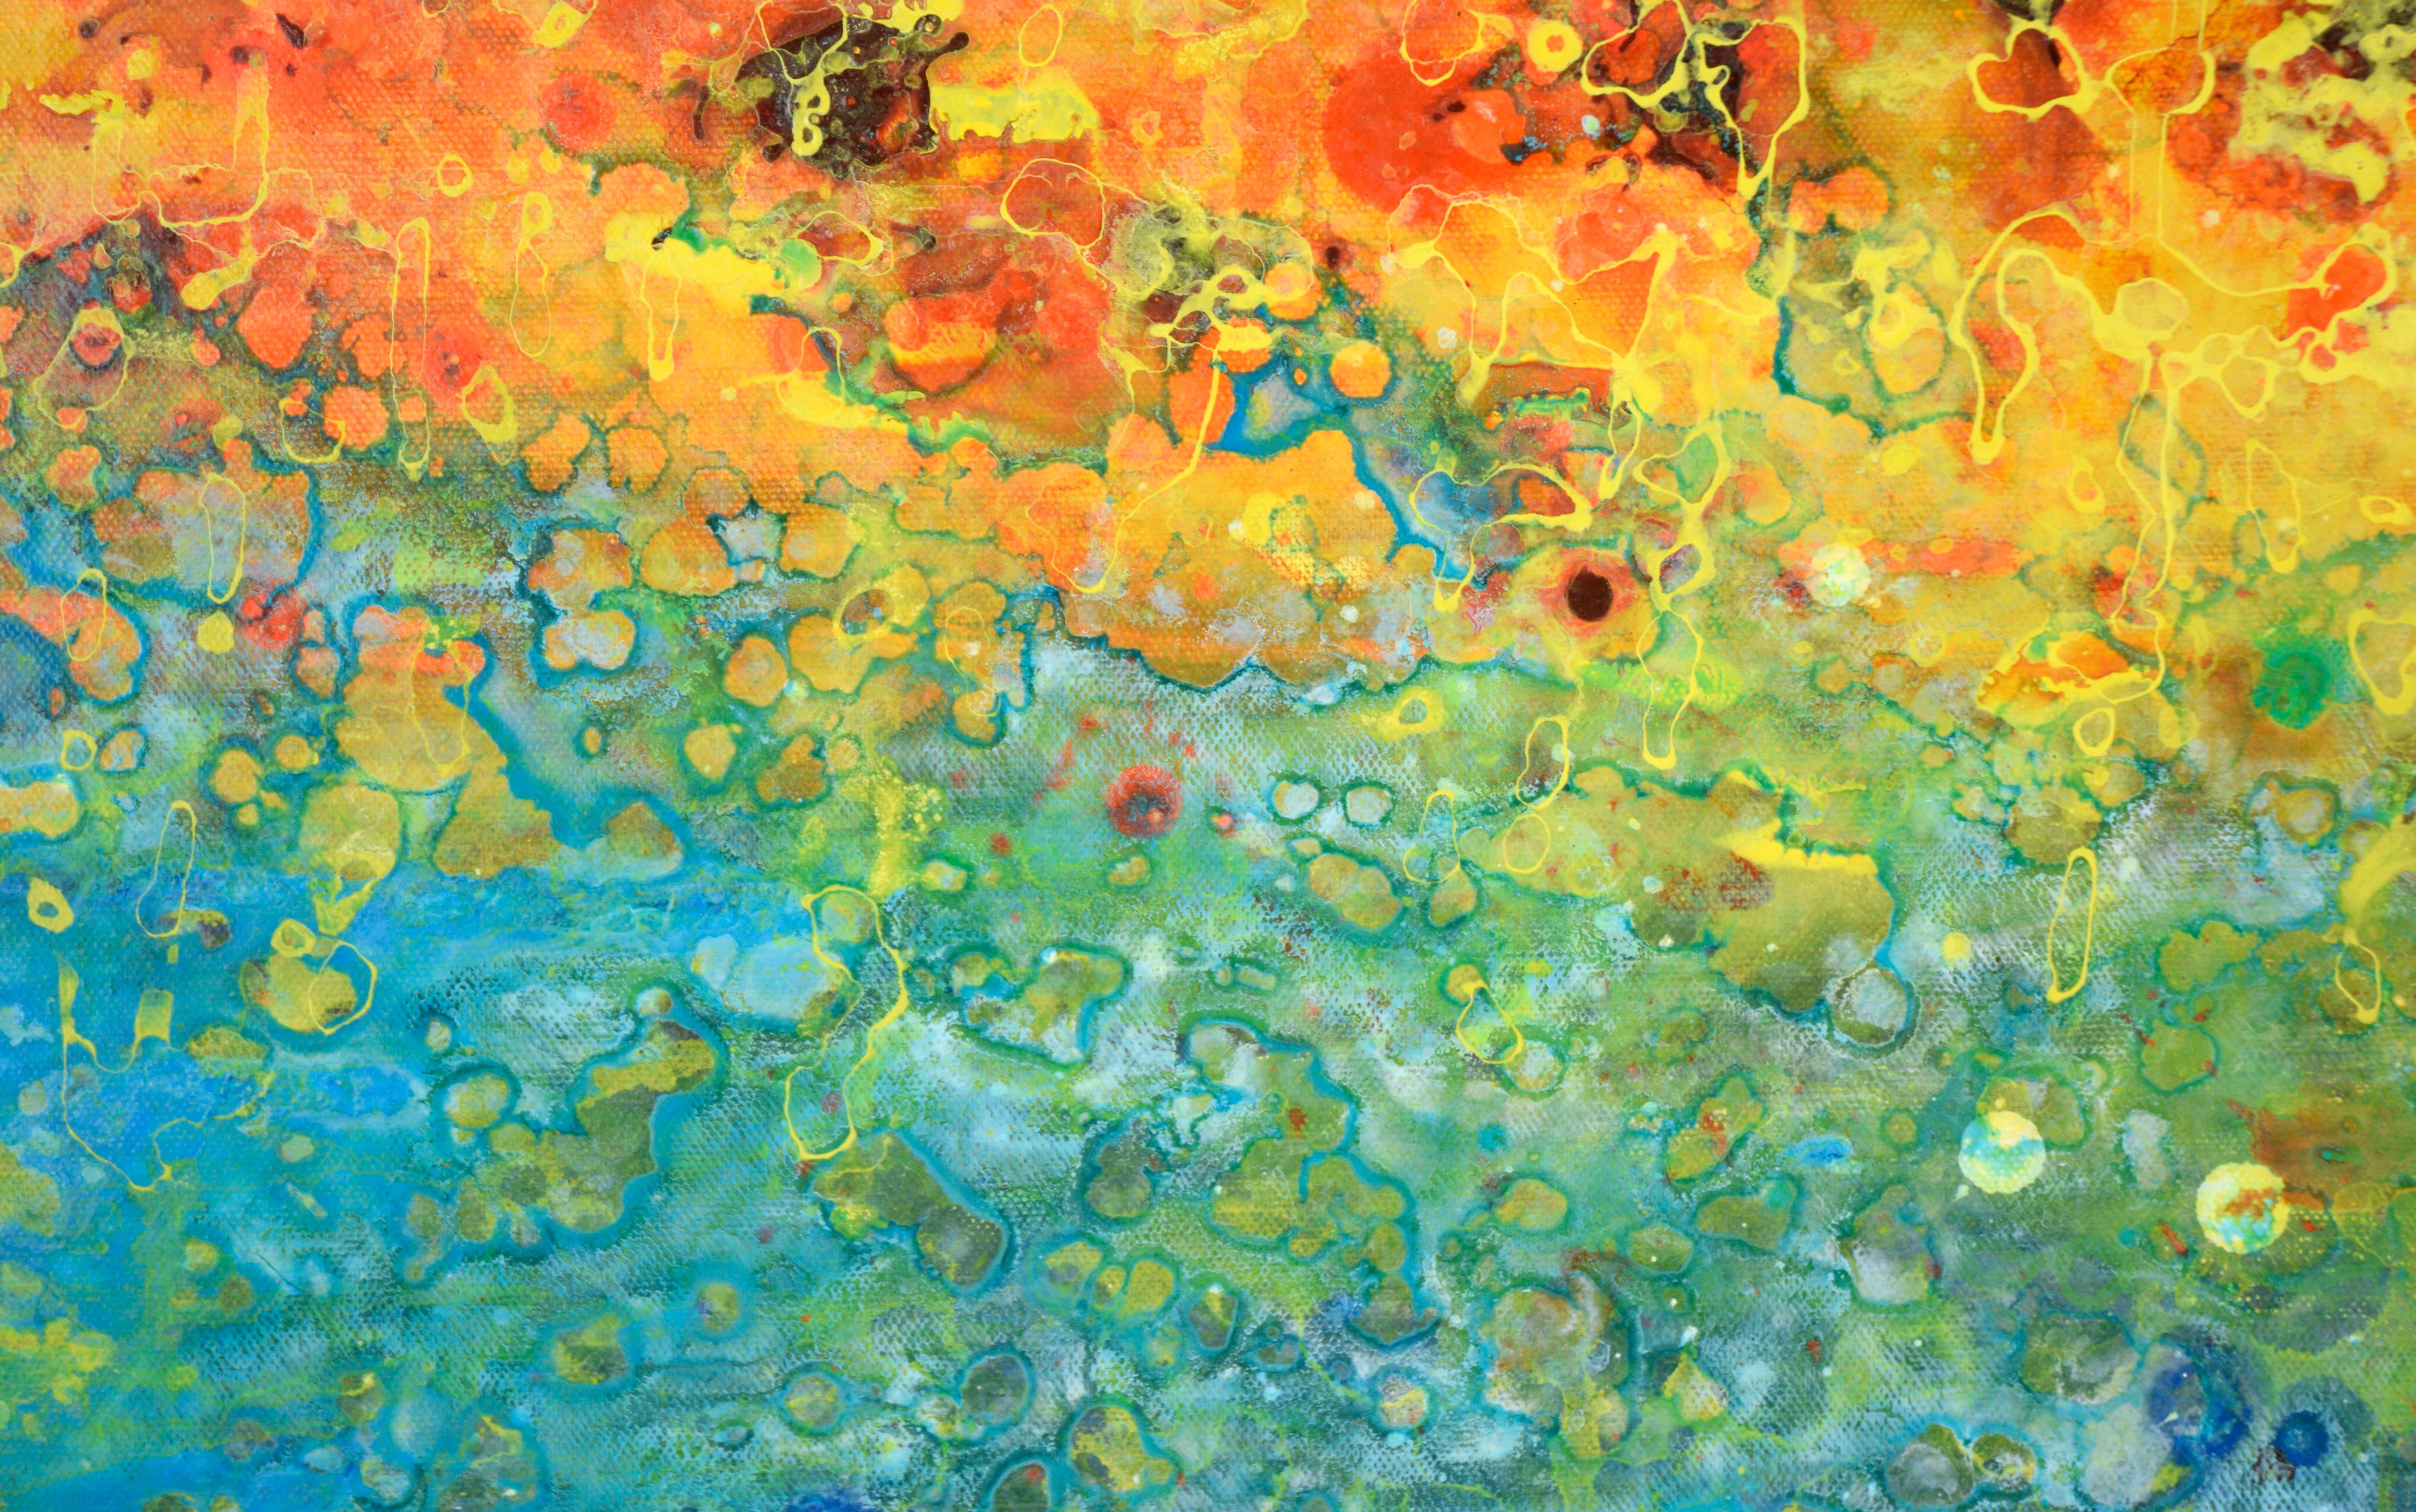 Fire and Water - Abstract Expressionist Composition in Acrylic on Canvas For Sale 2